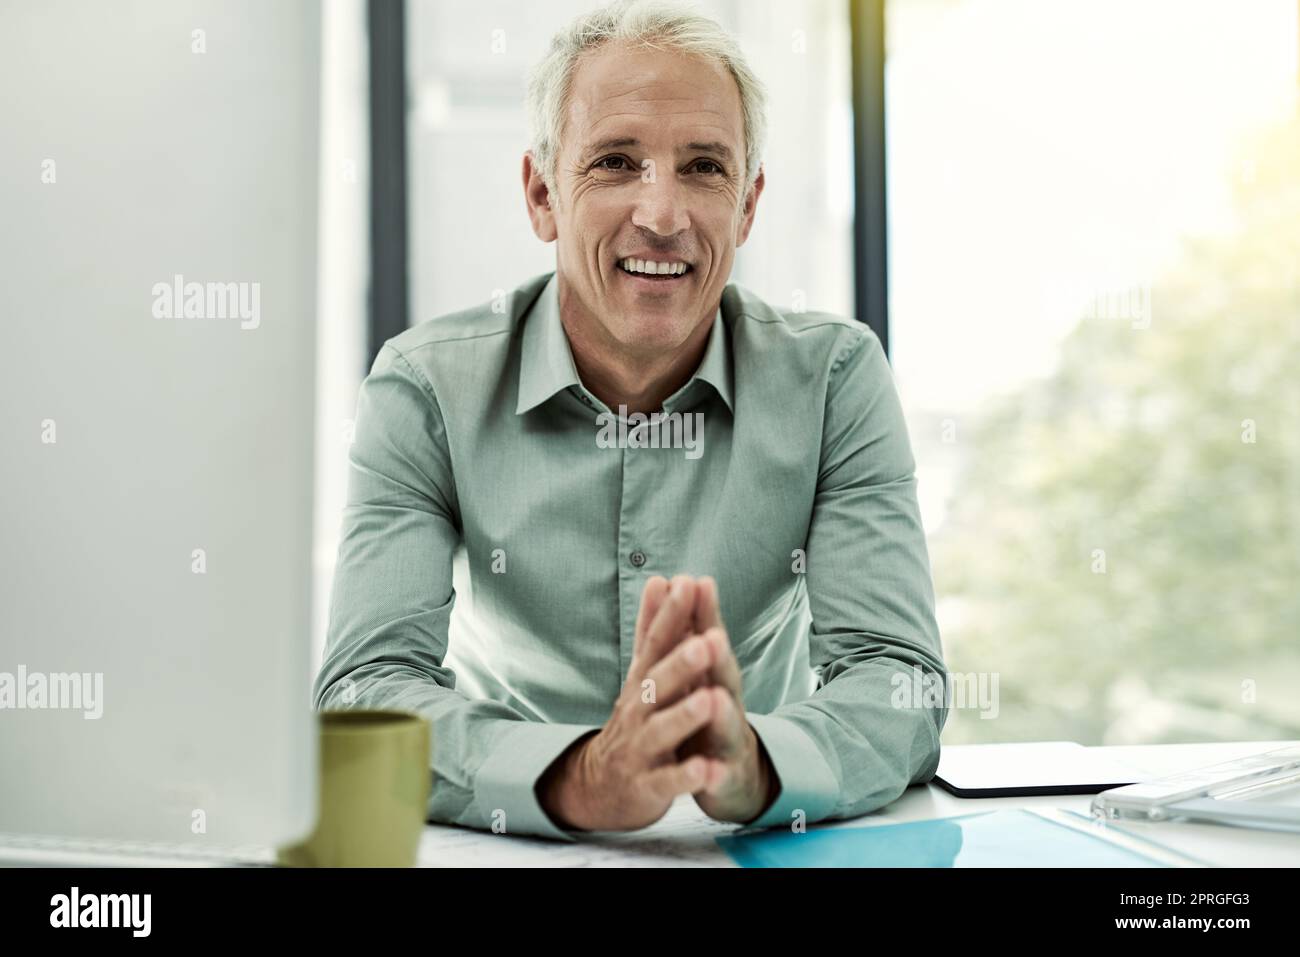 He has an easygoing approach to business. Portrait of a mature businessman working at his desk in an office. Stock Photo